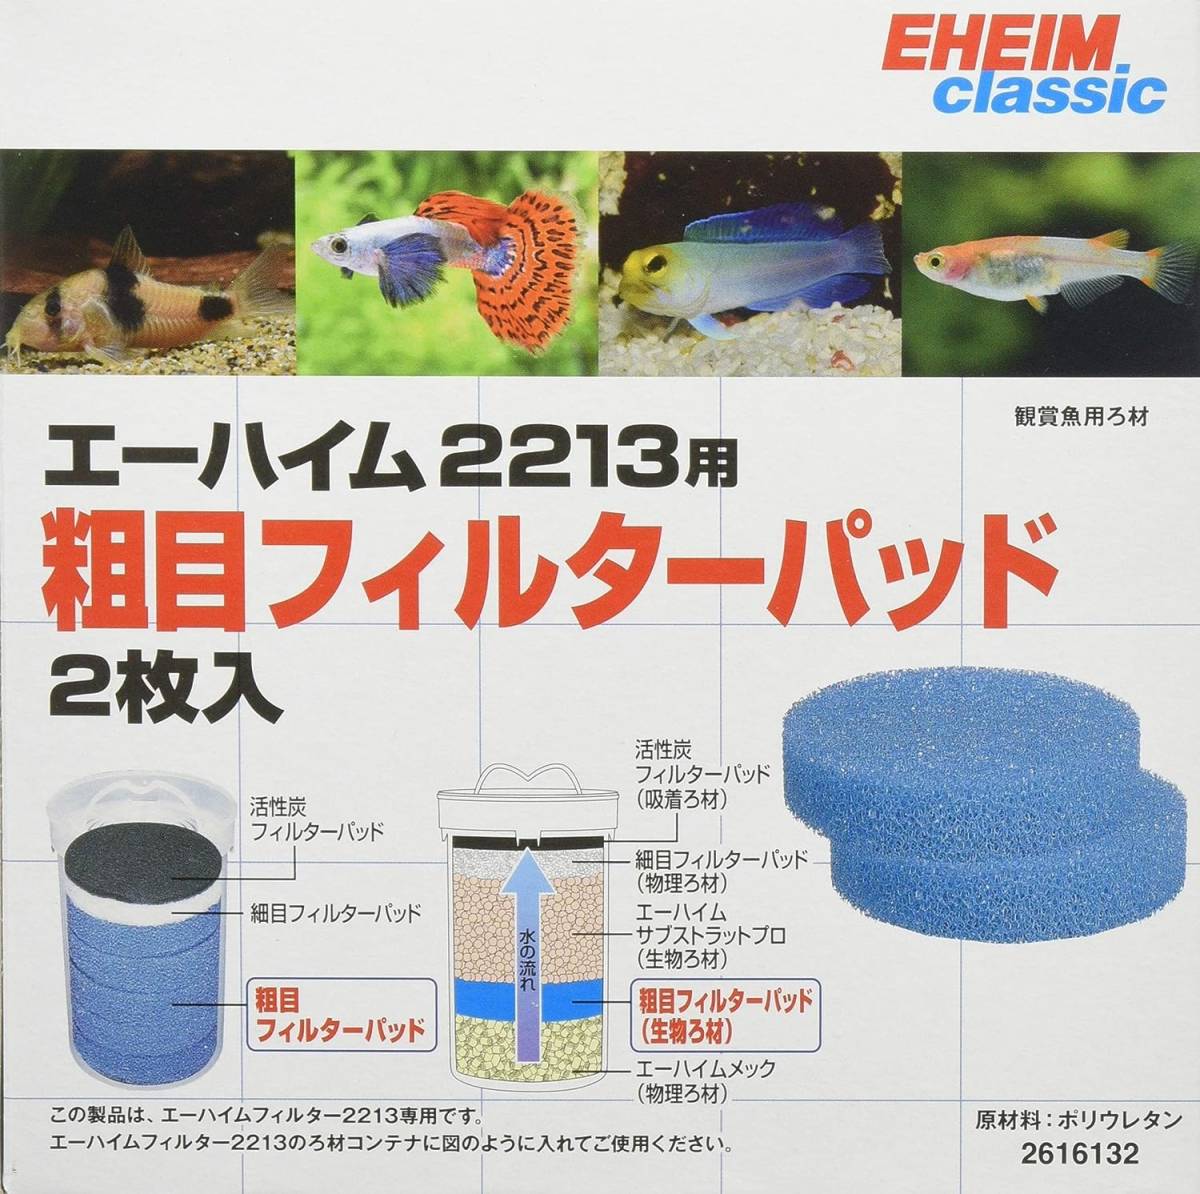 e- high m2213 exclusive use . eyes filter pad 2 sheets insertion 2616132 postage nationwide equal 220 jpy 